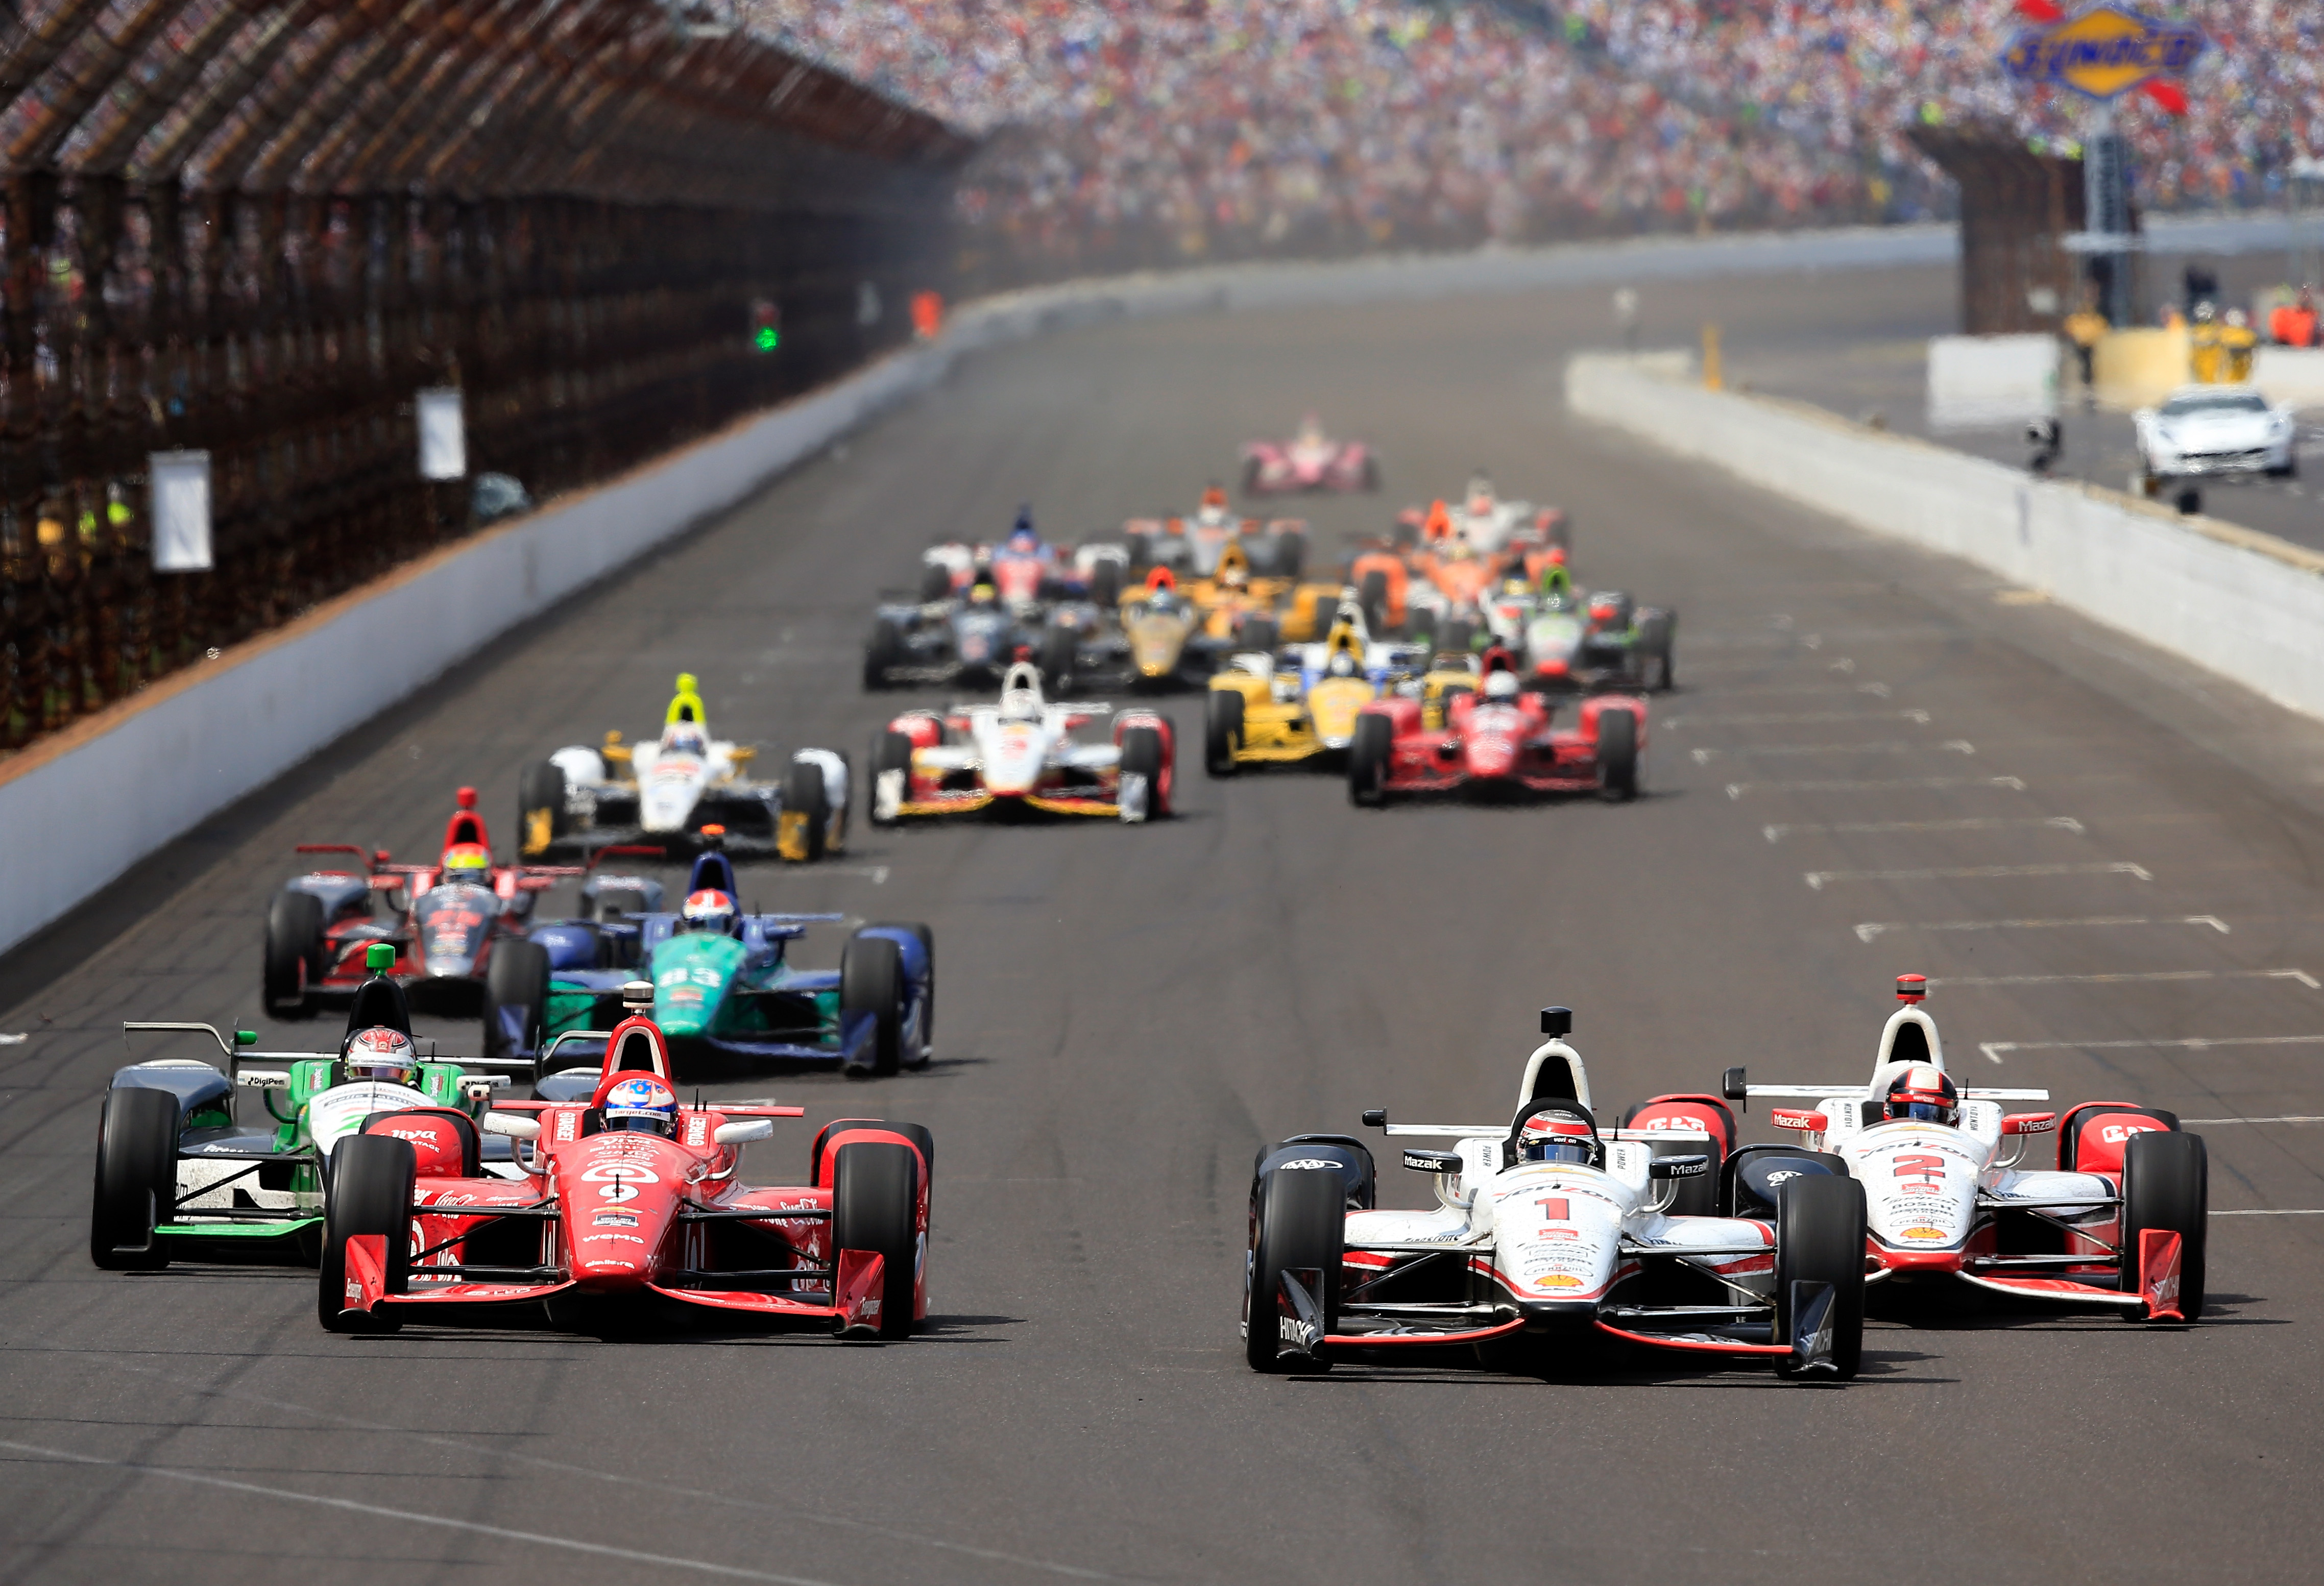 Indy 500 Starting Grid, Lineup & List of Drivers